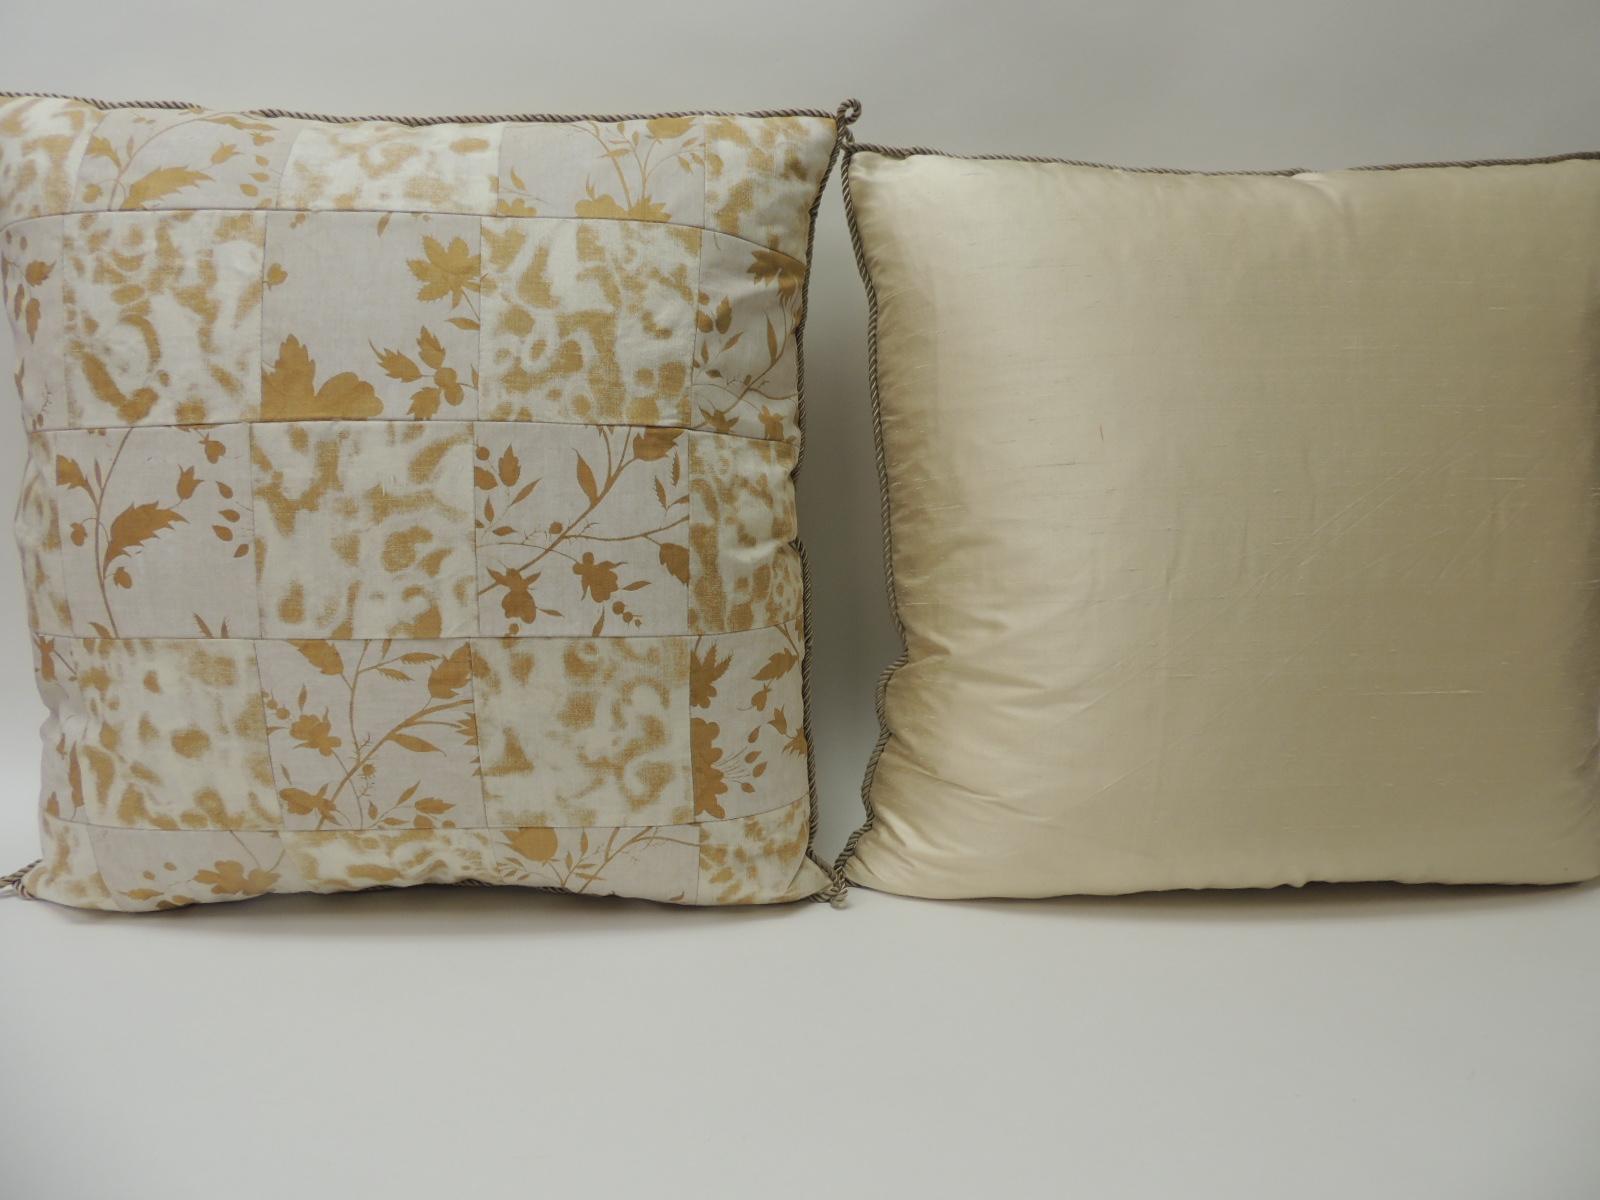 Hand-Crafted Pair of Vintage Yellow and Natural Fortuny Patchwork Square Decorative Pillows